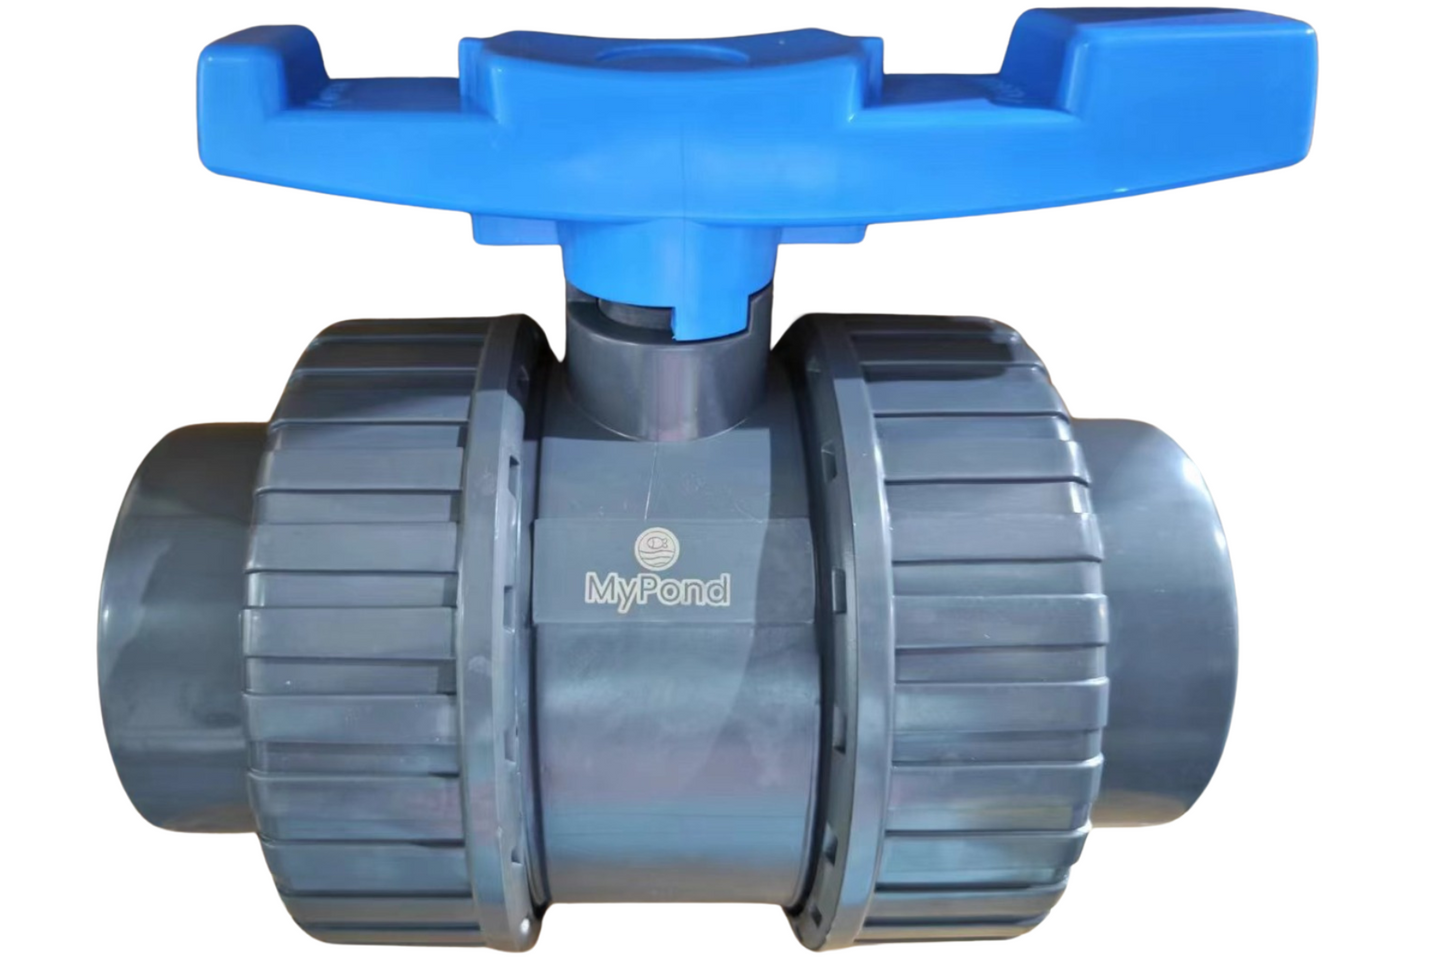 MyPond Double Union Ball Valve - Pressure Inch Sizing 1", 1.5, 3" and 4"